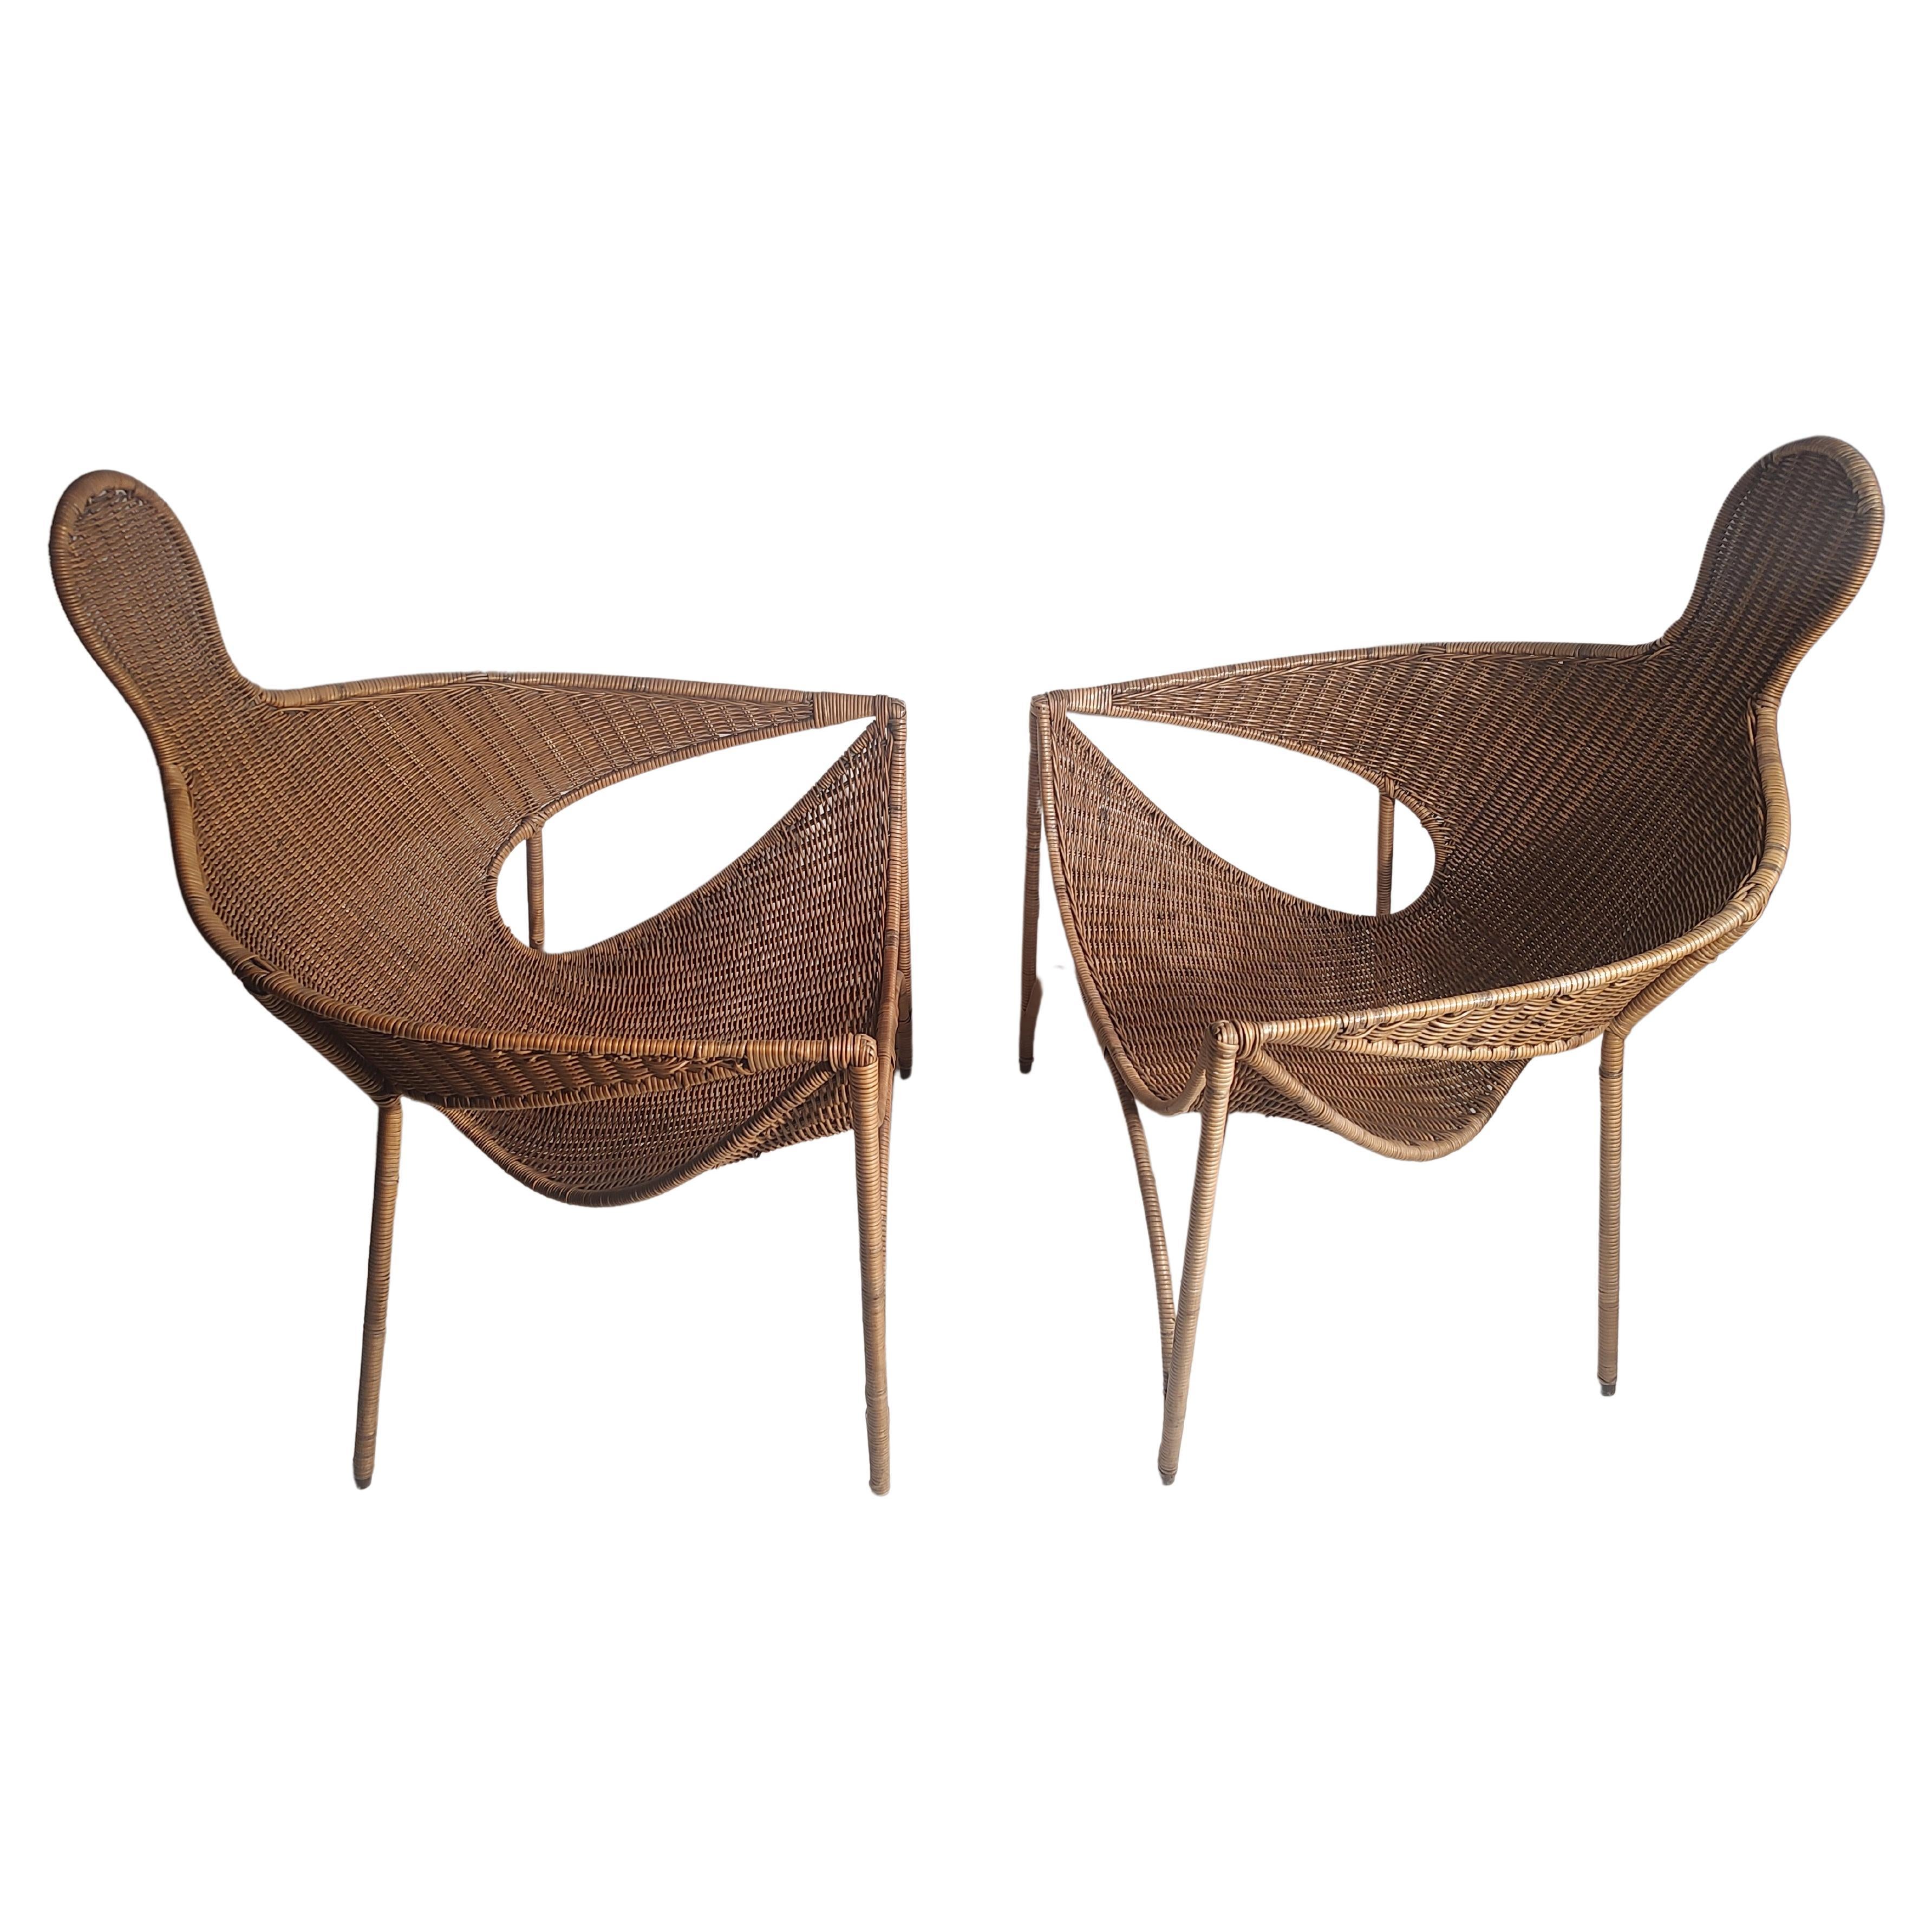 Pair of Mid Century Modern Sculptural Wicker & Iron Lounge Chairs Francis Mair  In Good Condition For Sale In Port Jervis, NY